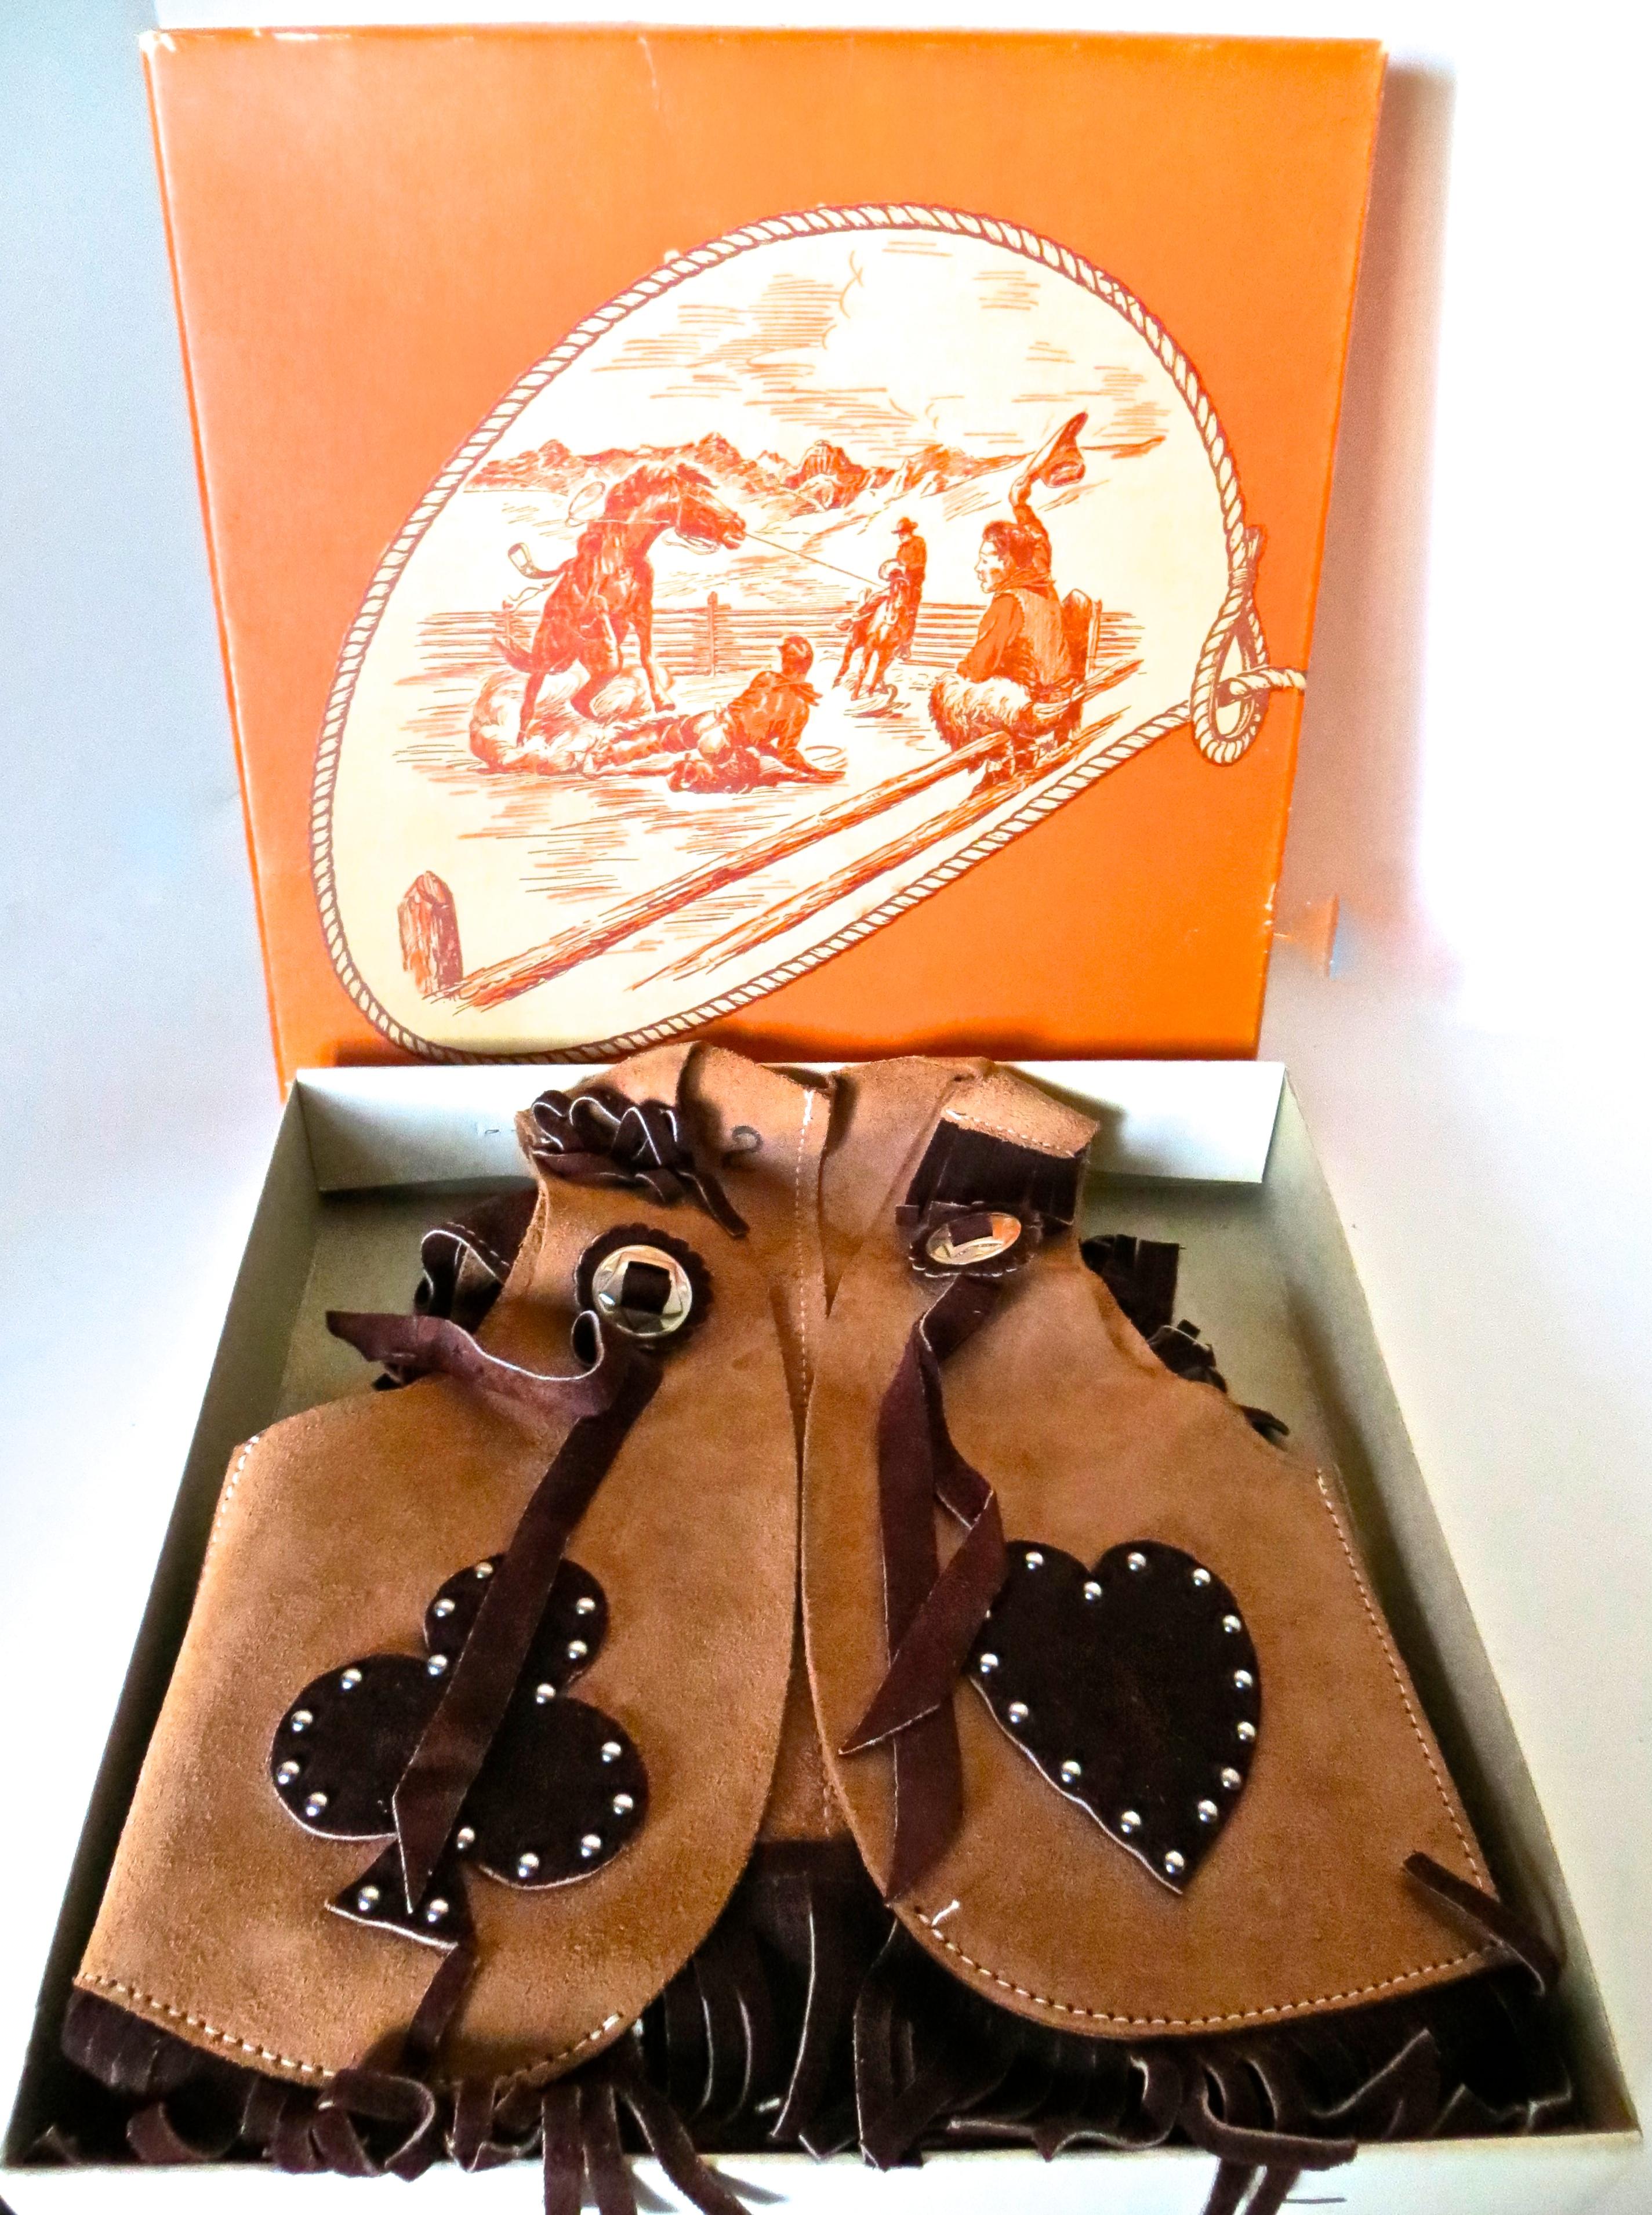 Dyed Child's Cowboy Outfit (Original Box) & Leather Cowboy Boots American, Ca.1950